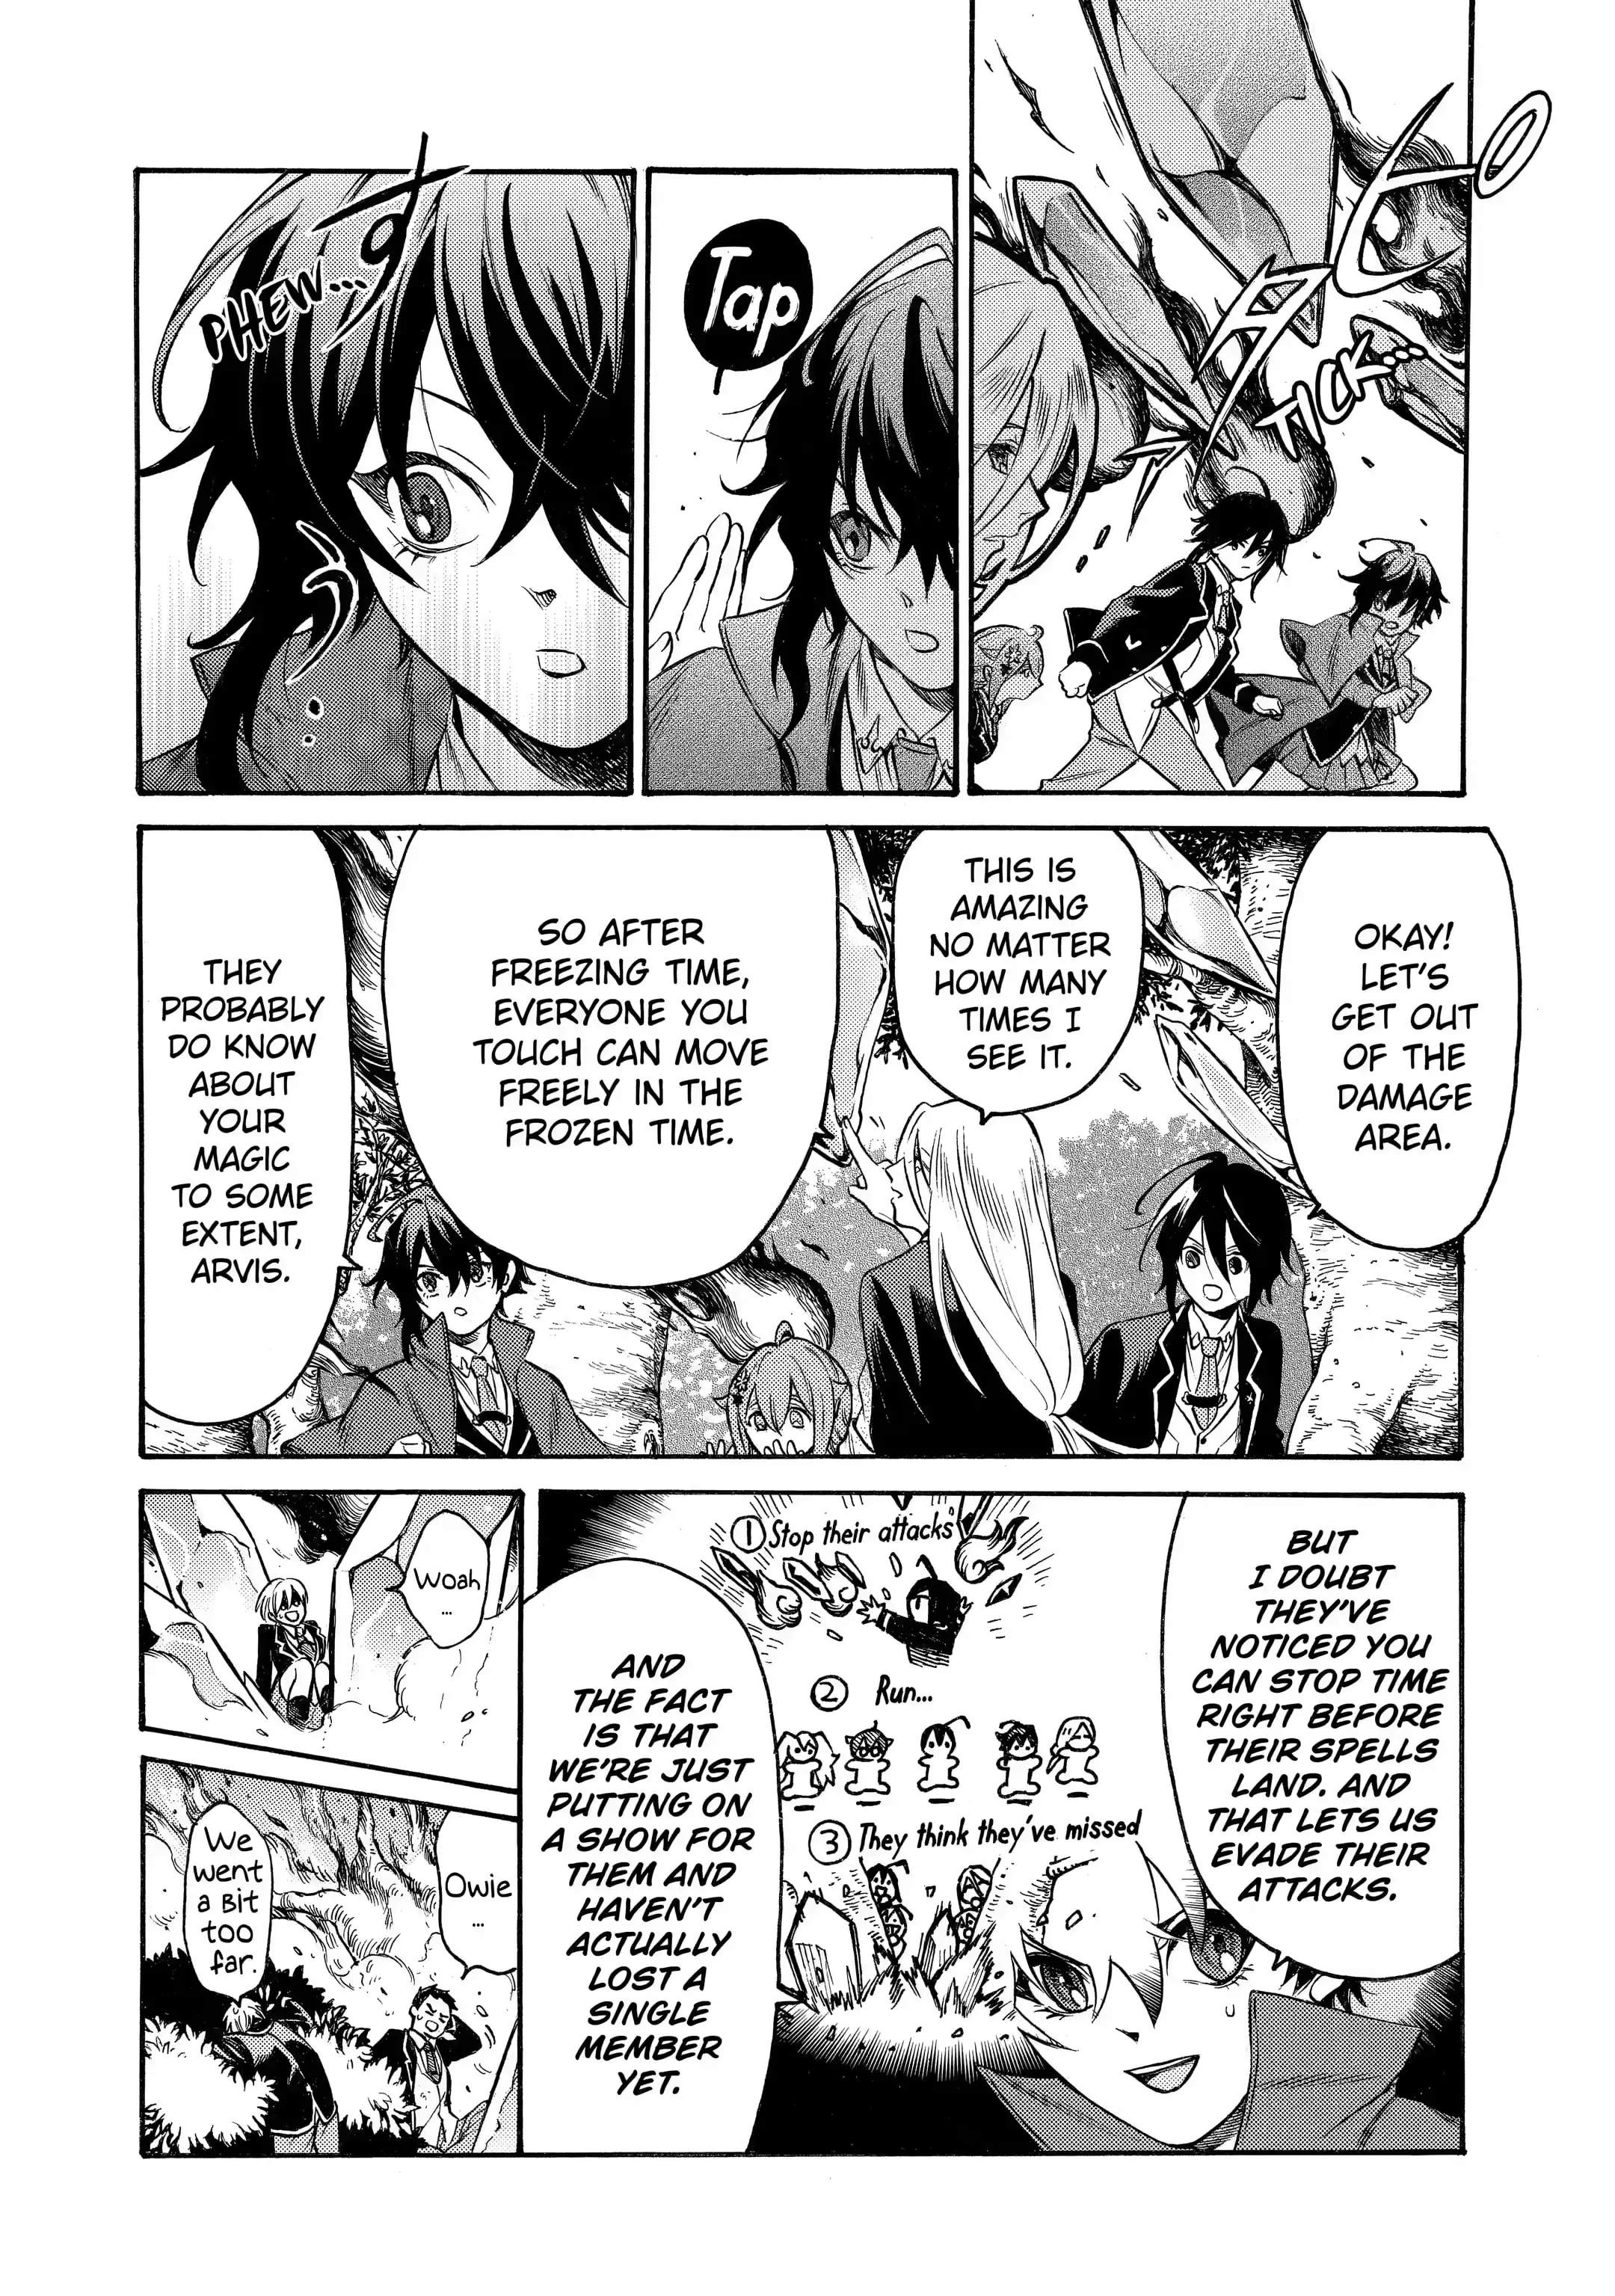 Reincarnation of the Unrivalled Time Mage: The Underachiever at the Magic Academy Turns Out to Be the Strongest Mage Who Controls Time! Chapter 15.2-eng-li - Page 8